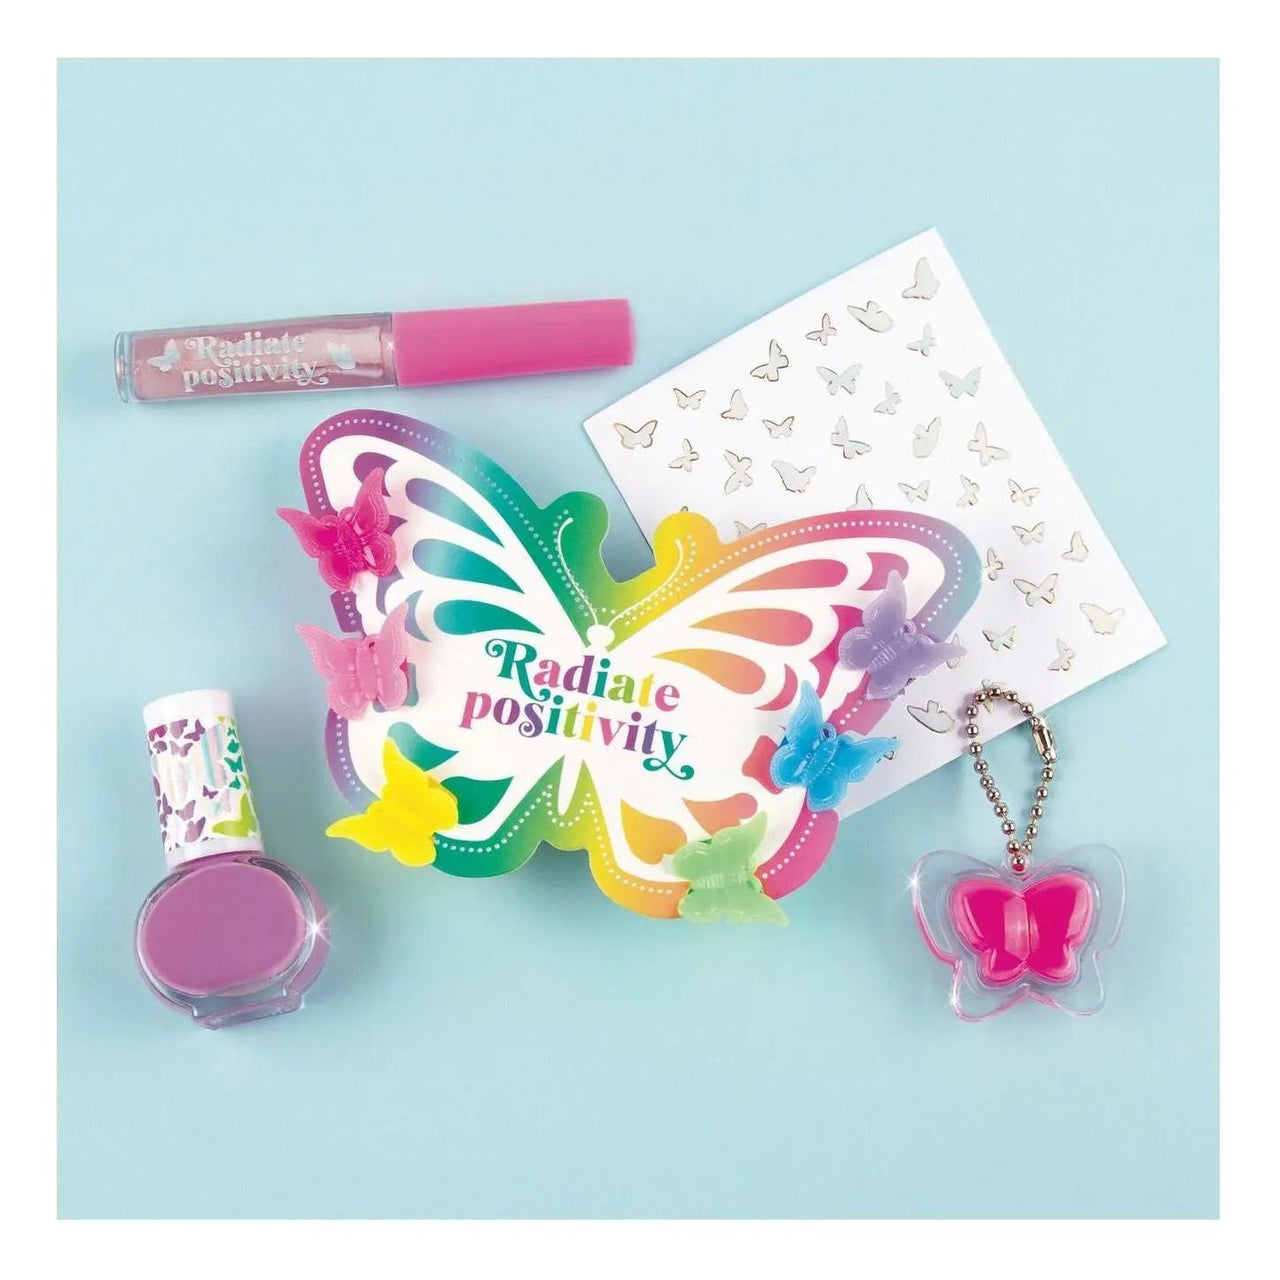 Butterfly Dreams Cosmetic Set Make It Real